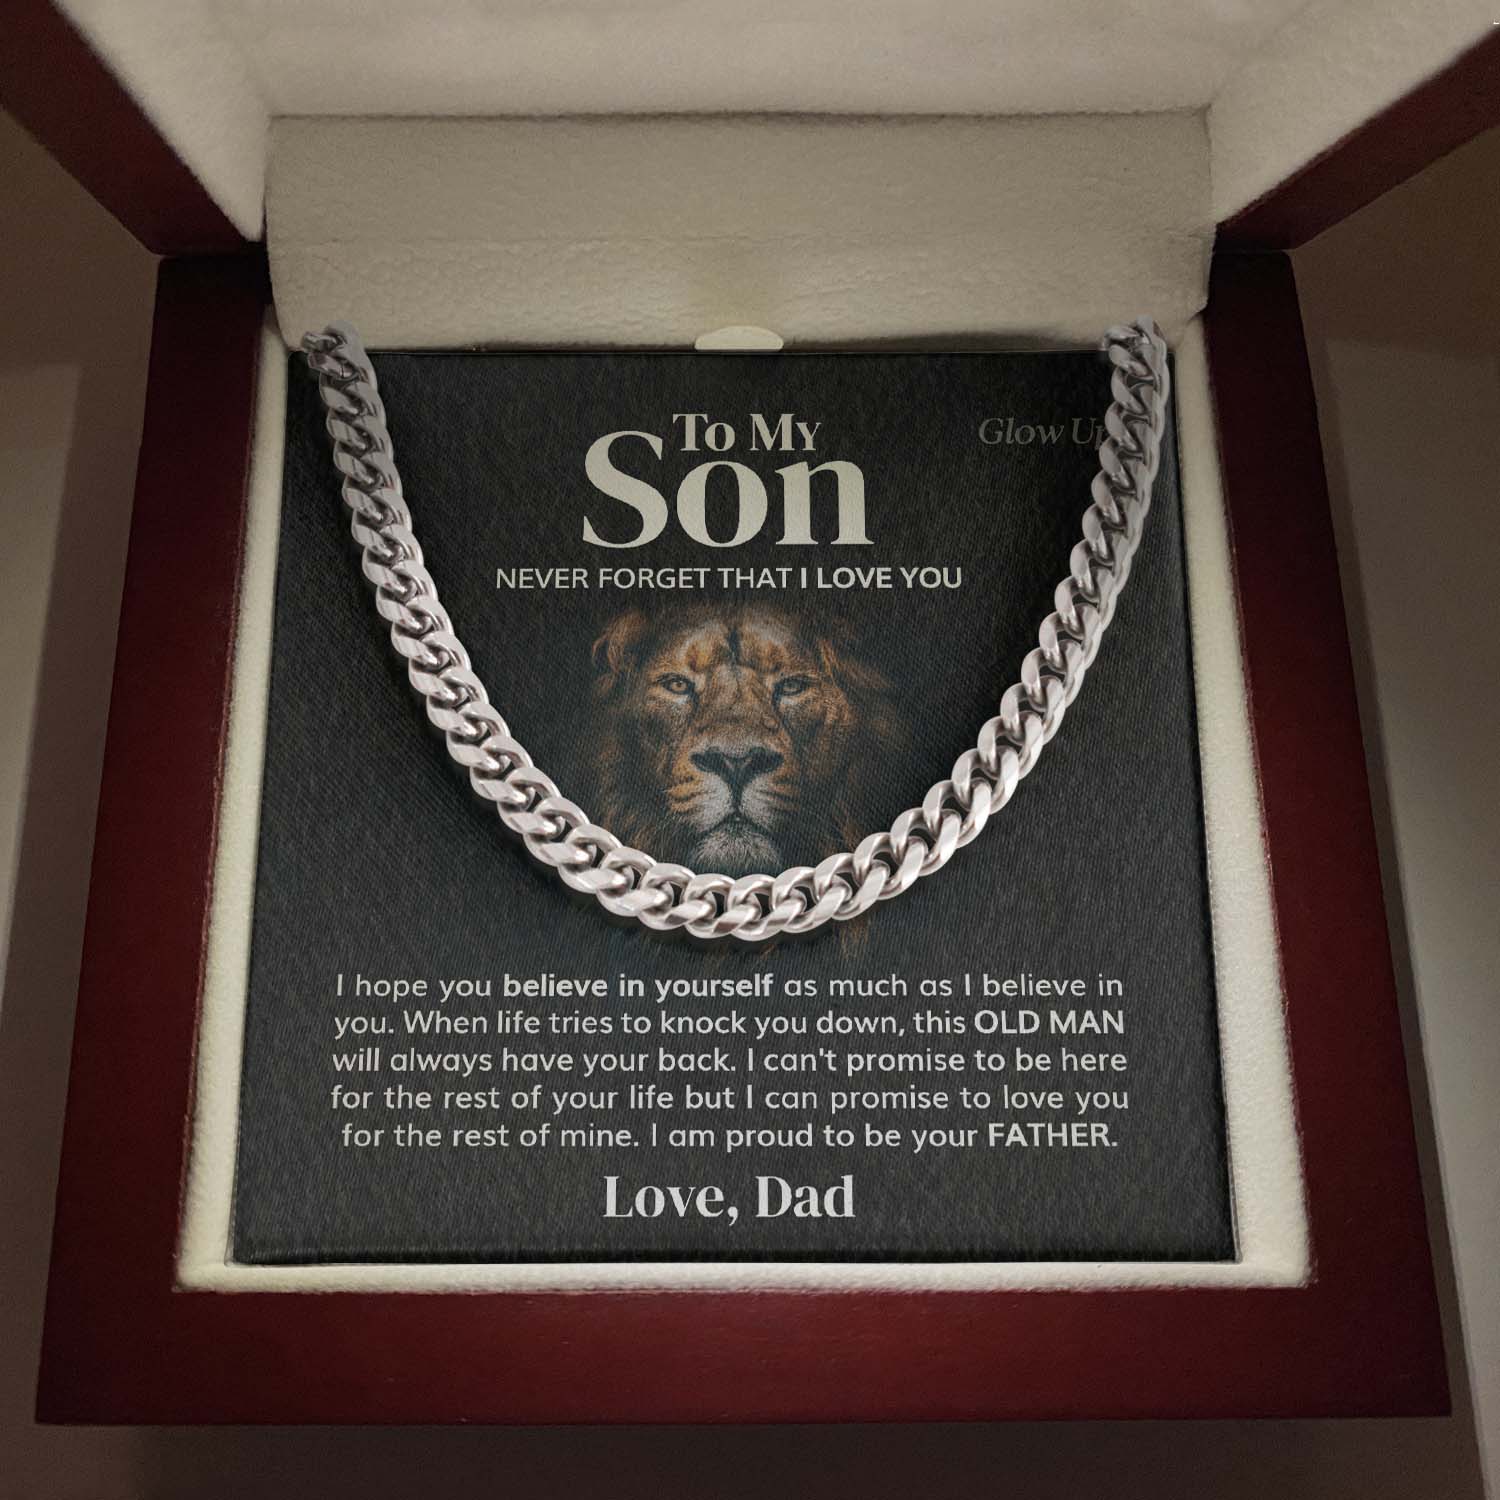 GlowUp Cuban Link Chain 316L Stainless Steel / Luxury LED Box Believe in Yourself Cuban Chain Necklace | Strengthen Dad-Son Bond